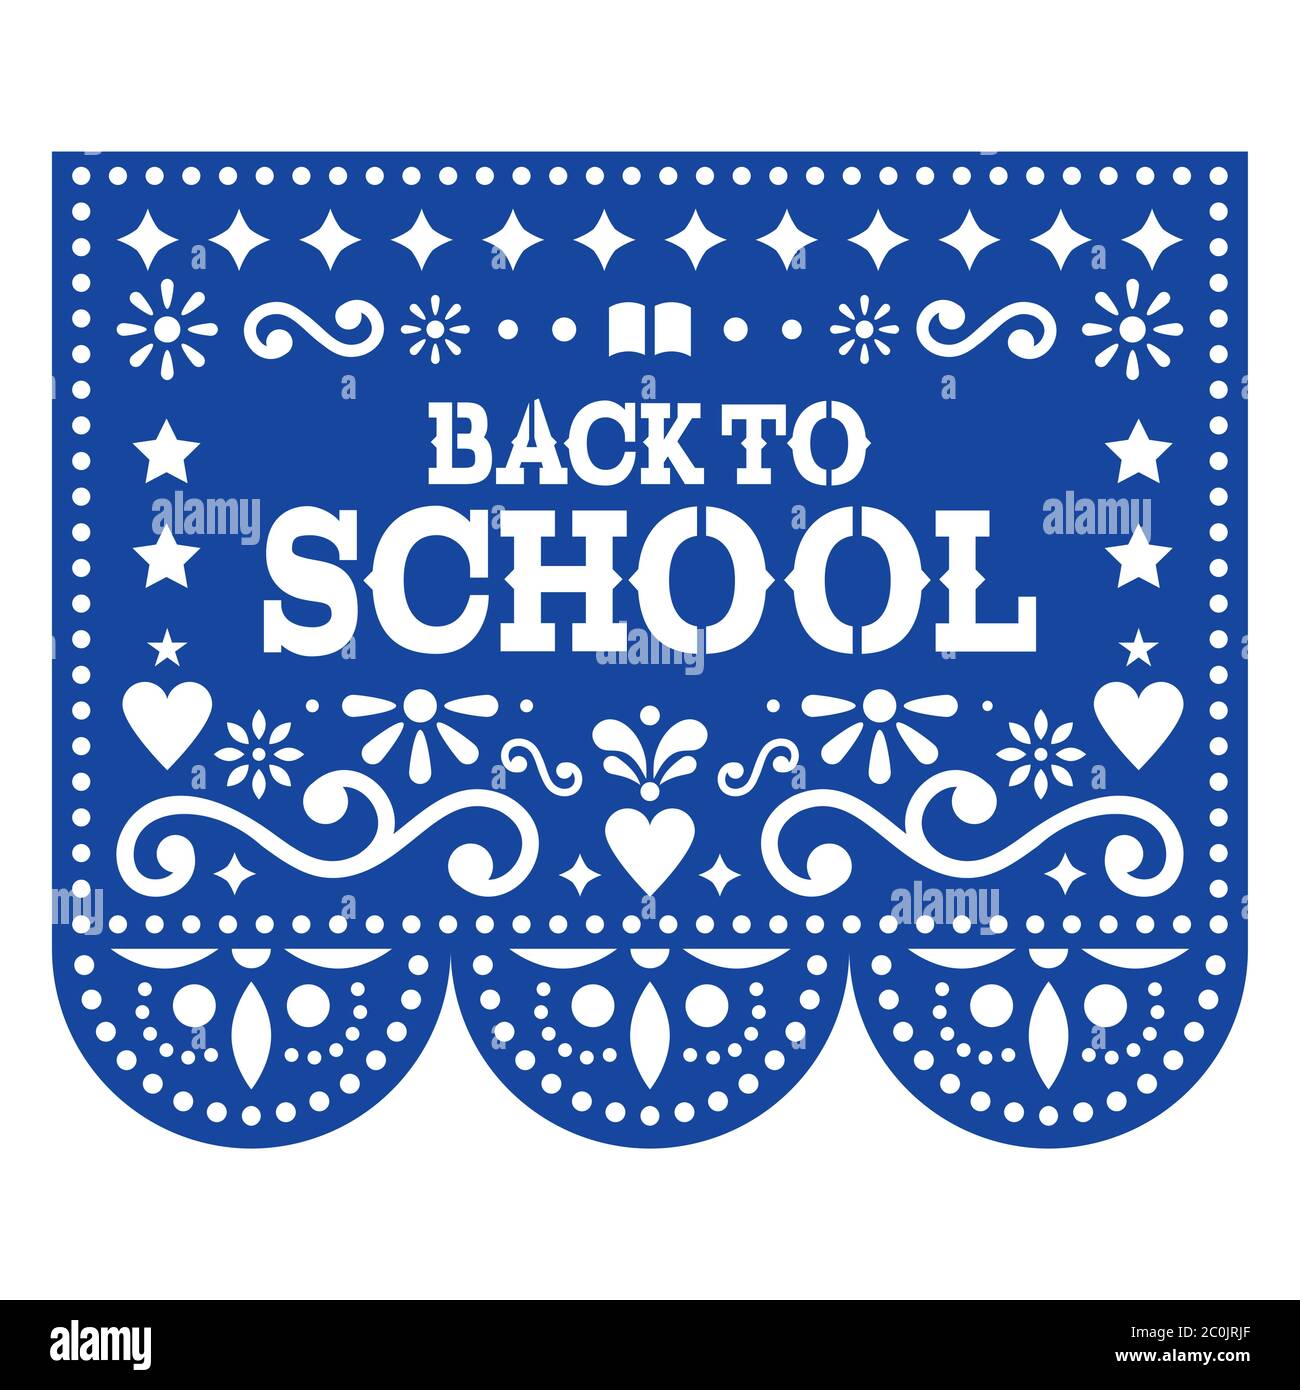 Back to school vector greeting card - Papel Picado style decoration, back to education Stock Vector